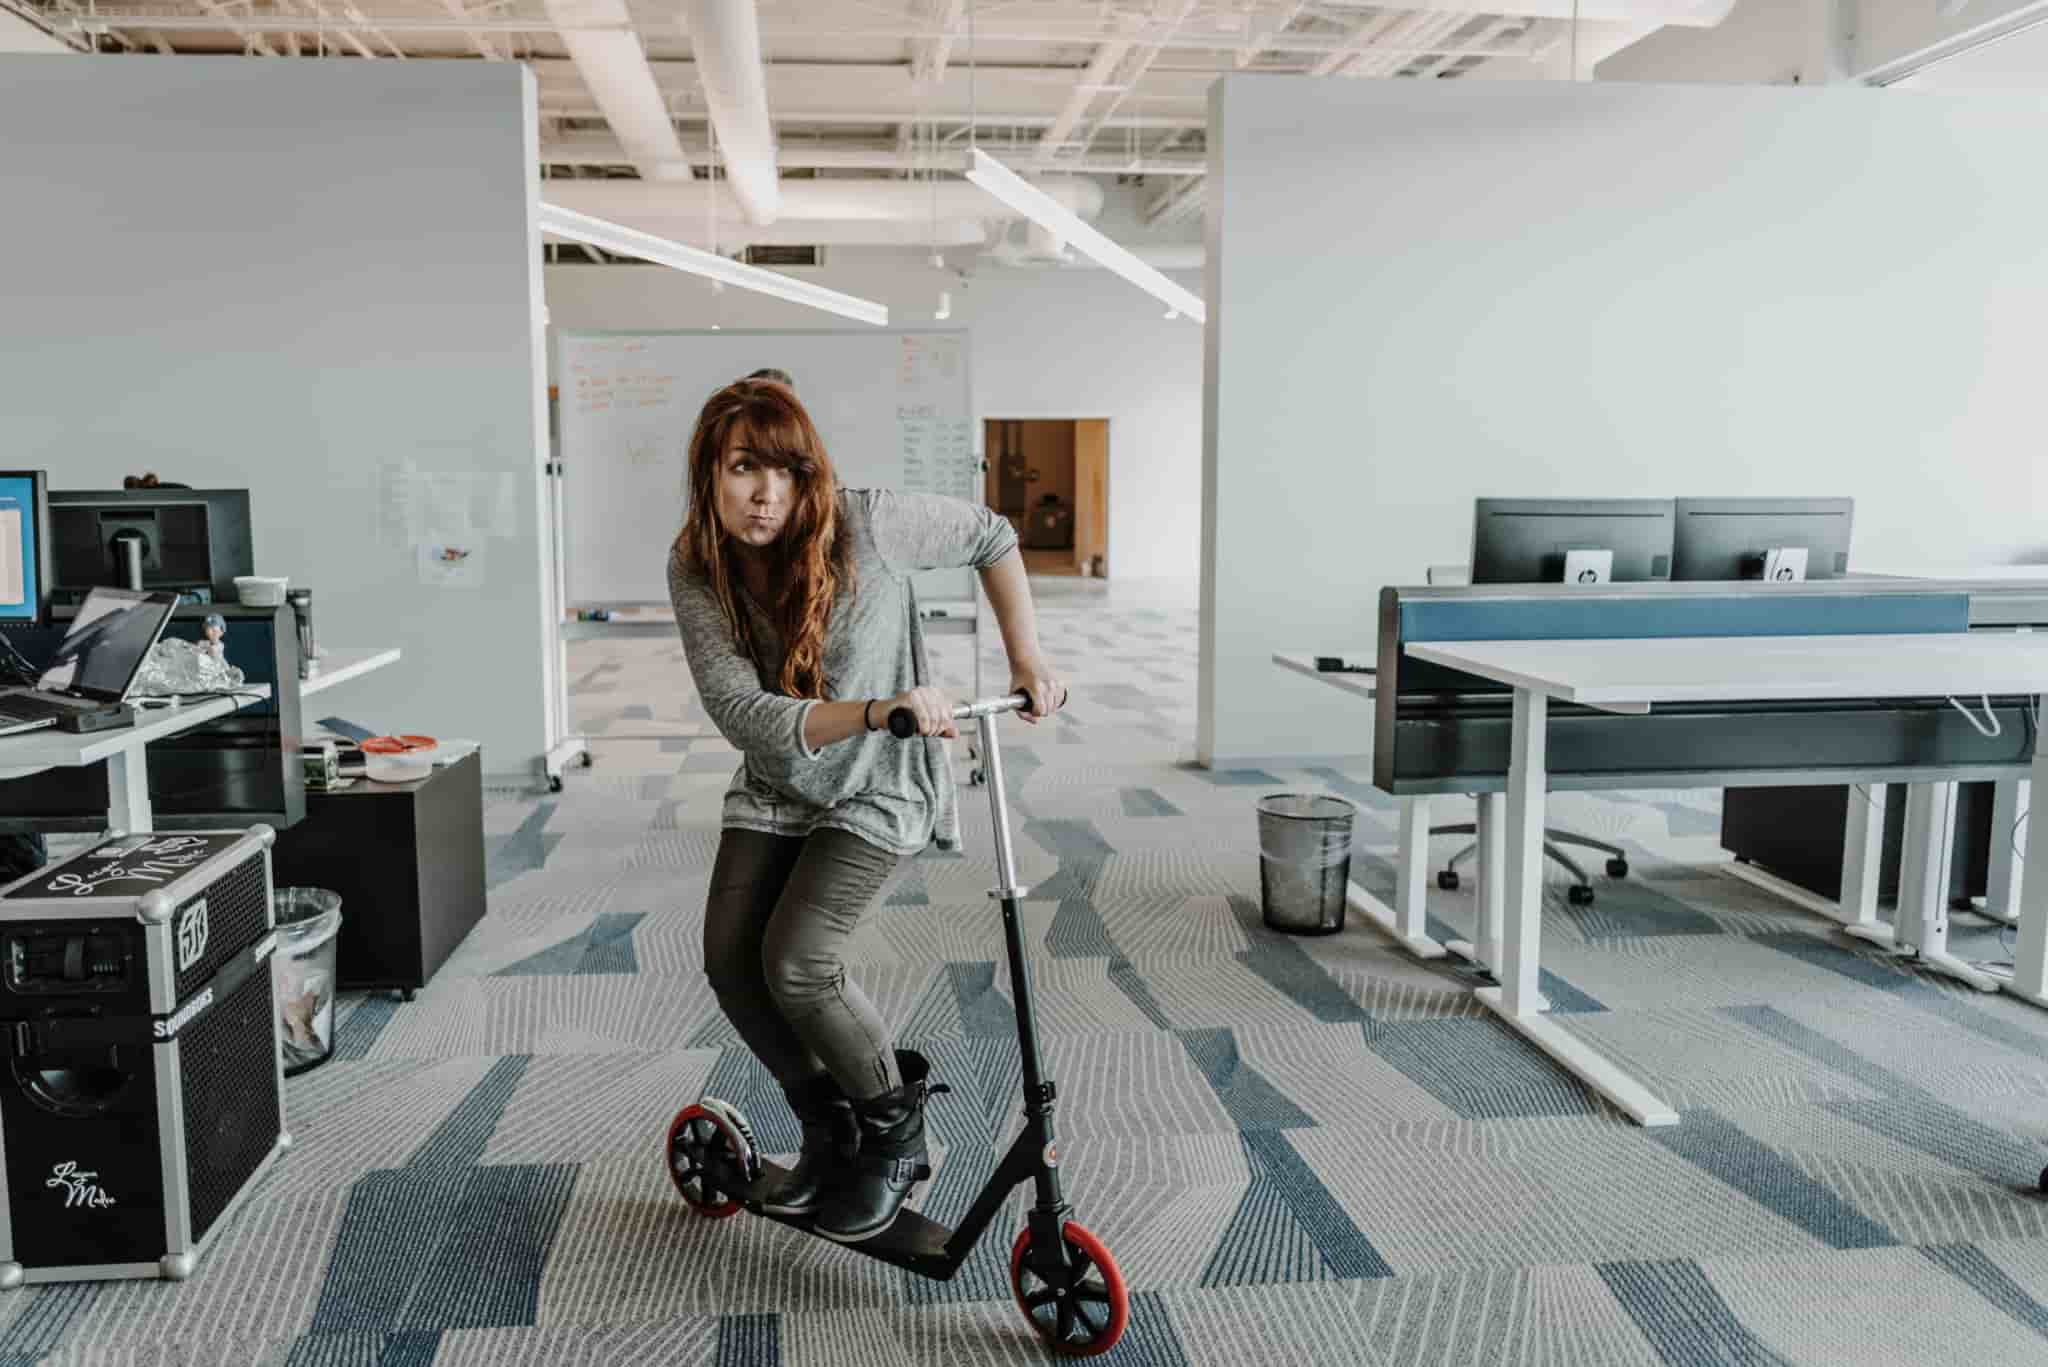 A woman riding a scooter in an office.